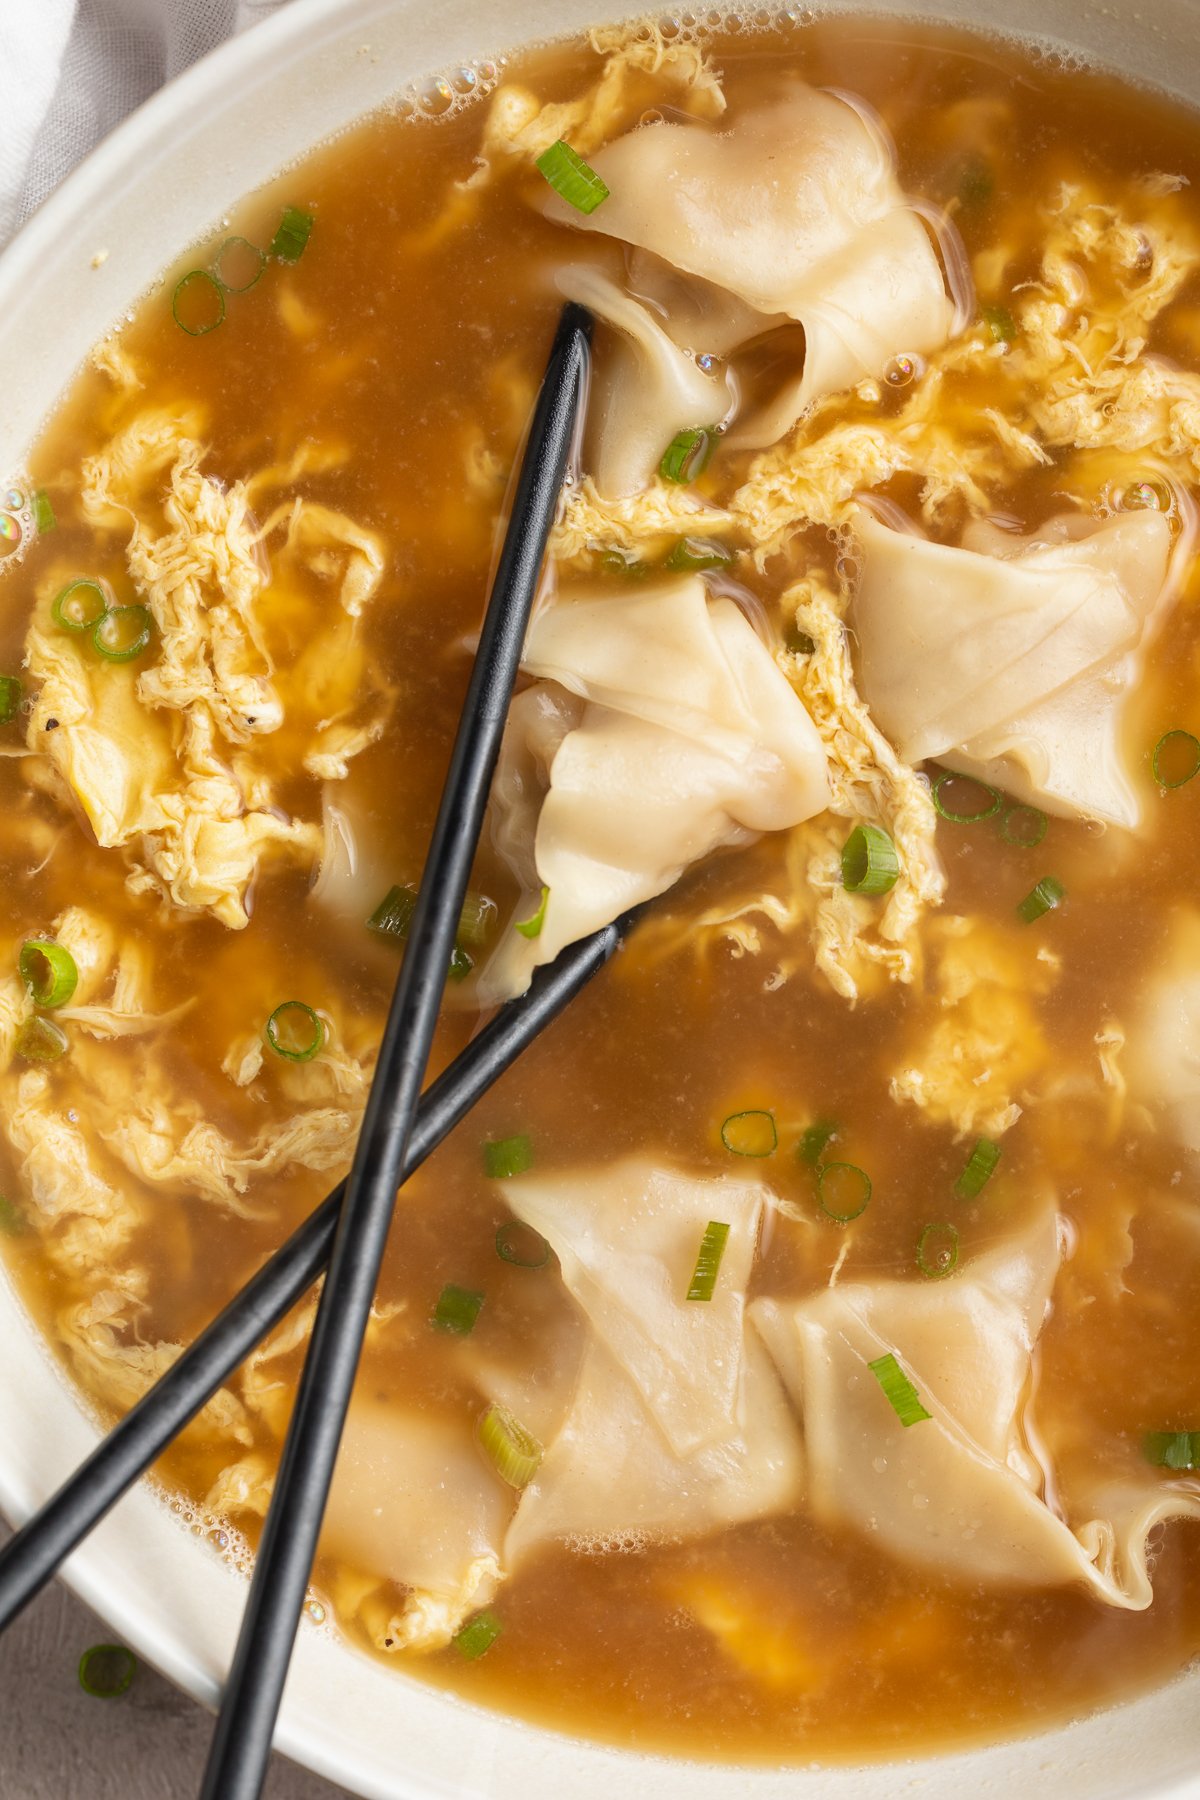 Overhead view of a bowl of wonton egg drop soup. 2 black chopsticks rest in the bowl of soup, and the right half of the bowl is out of the frame.